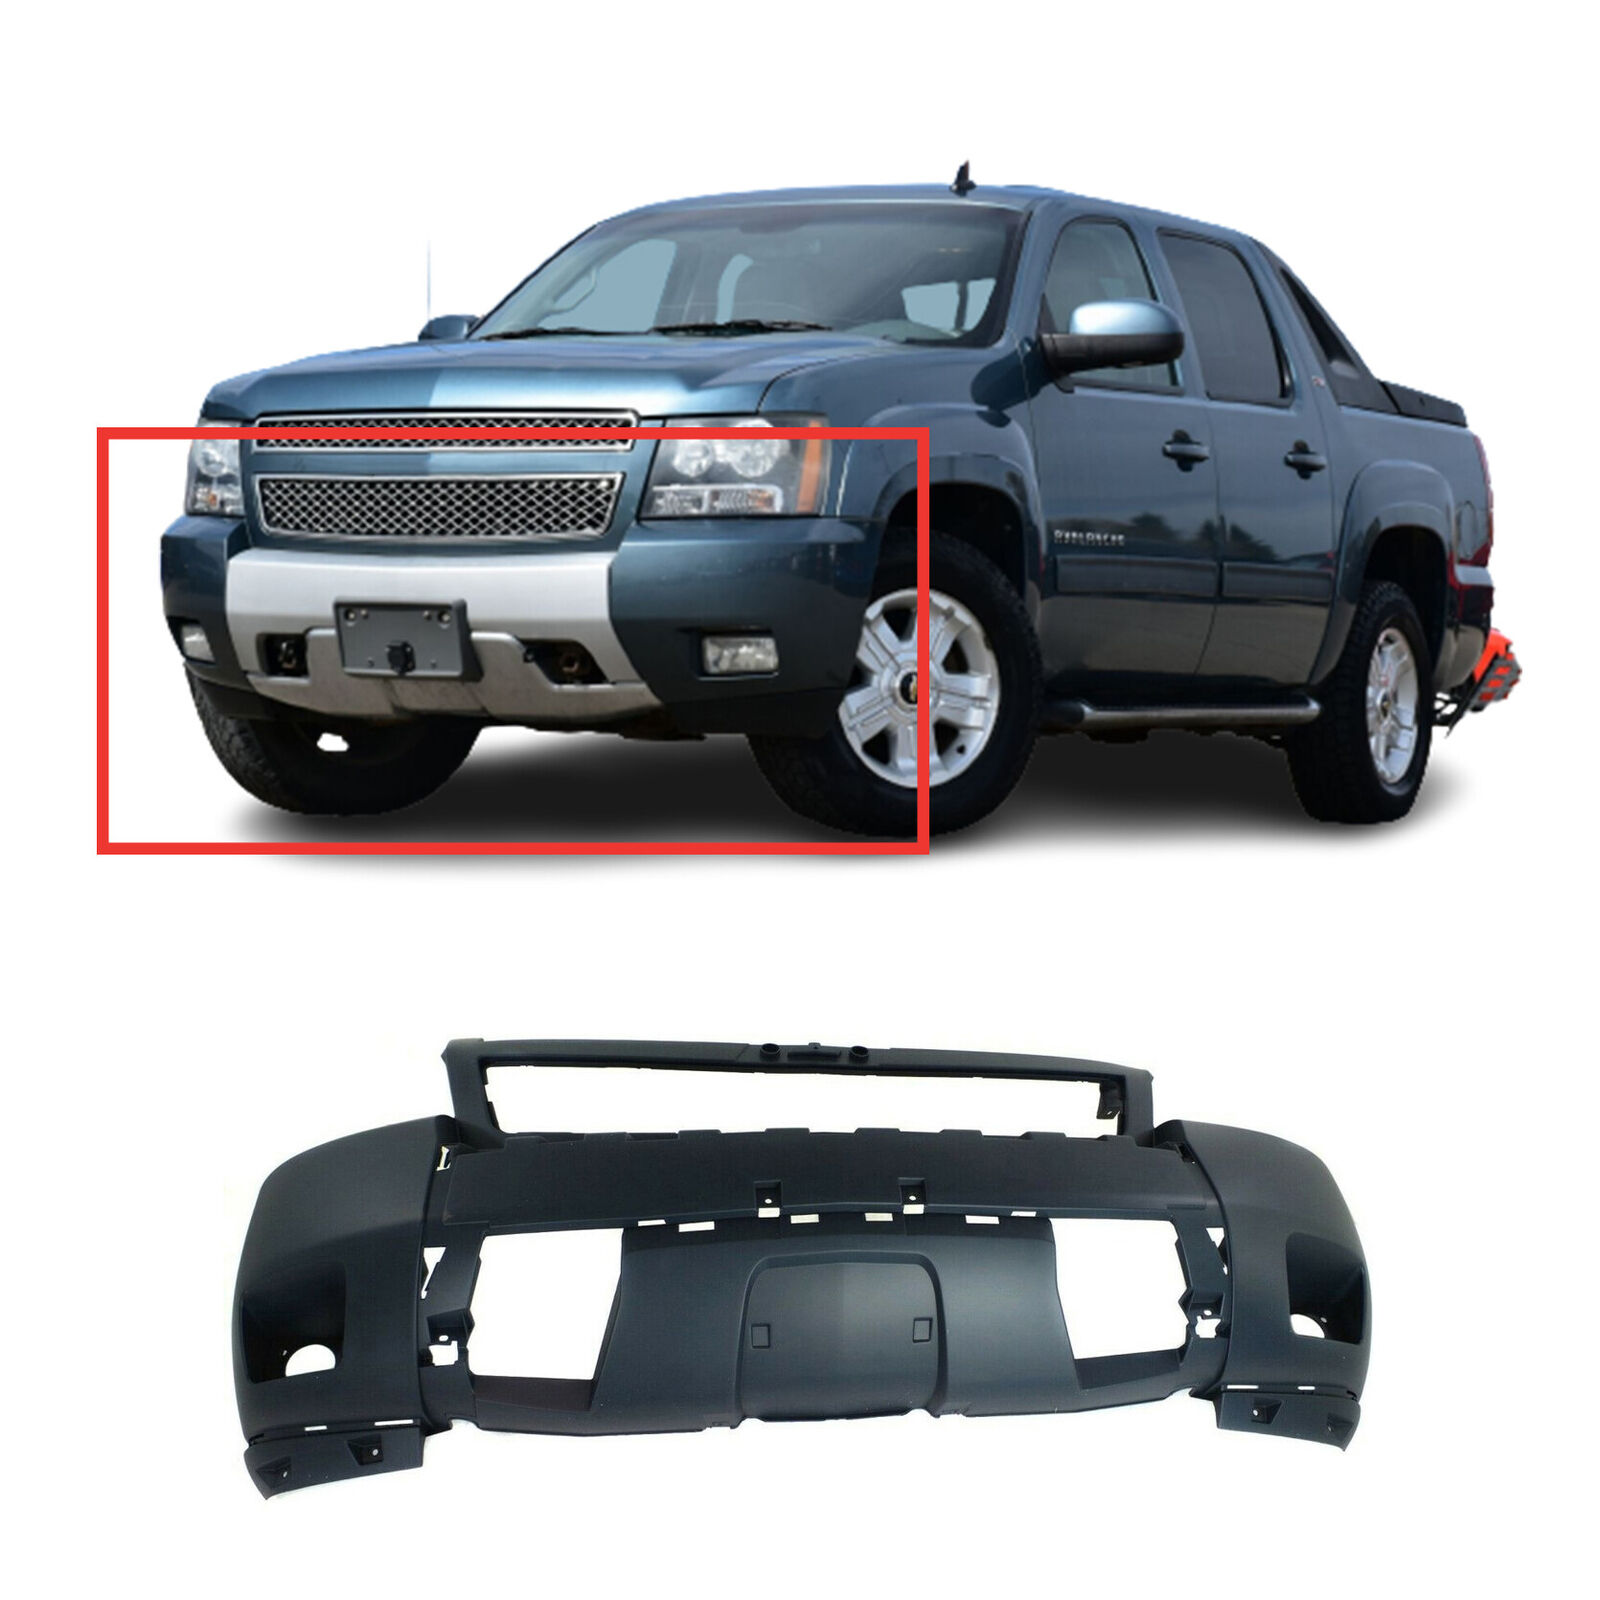 Front Bumper Cover For 2007 2010 Chevrolet Suburban 1500 2500 Tahoe Avalanche